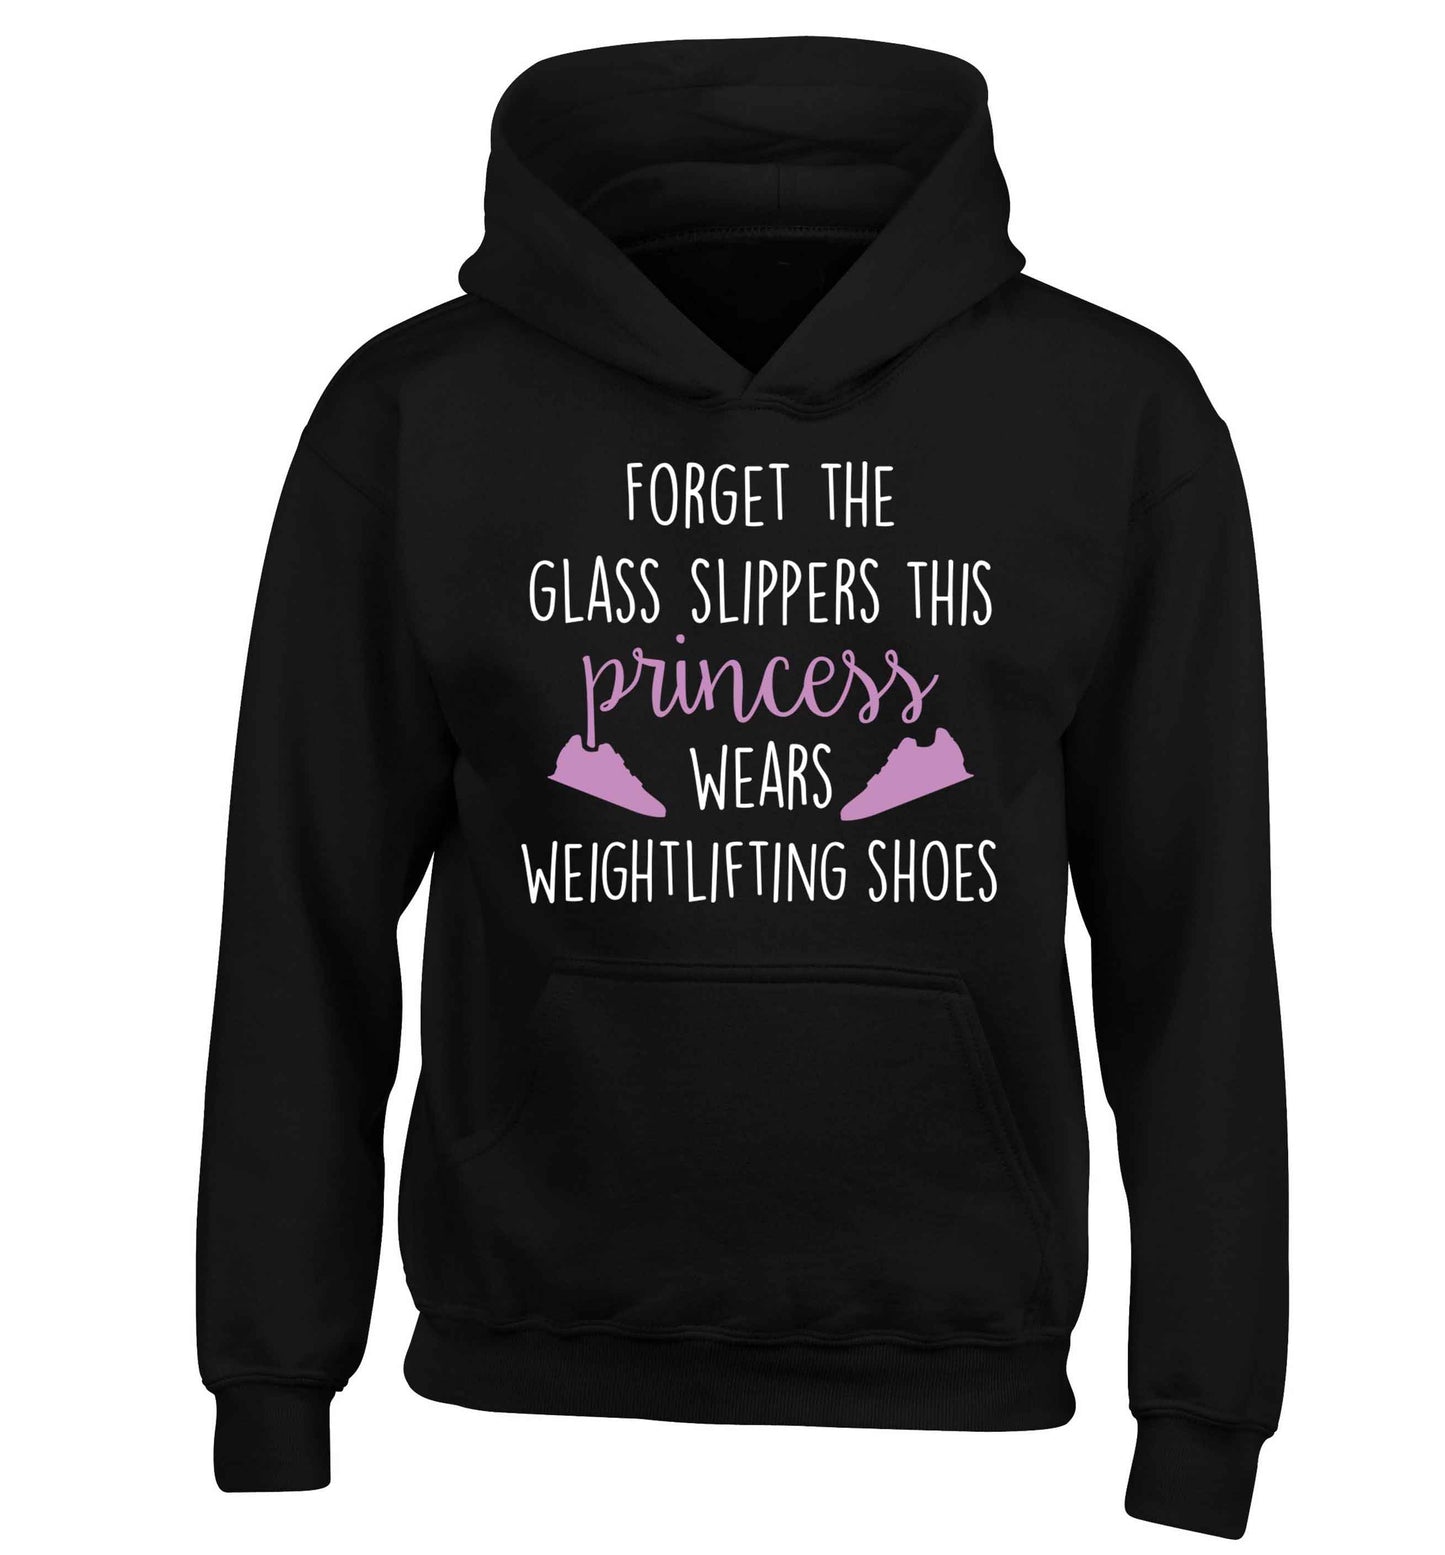 Forget the glass slippers this princess wears weightlifting shoes children's black hoodie 12-13 Years